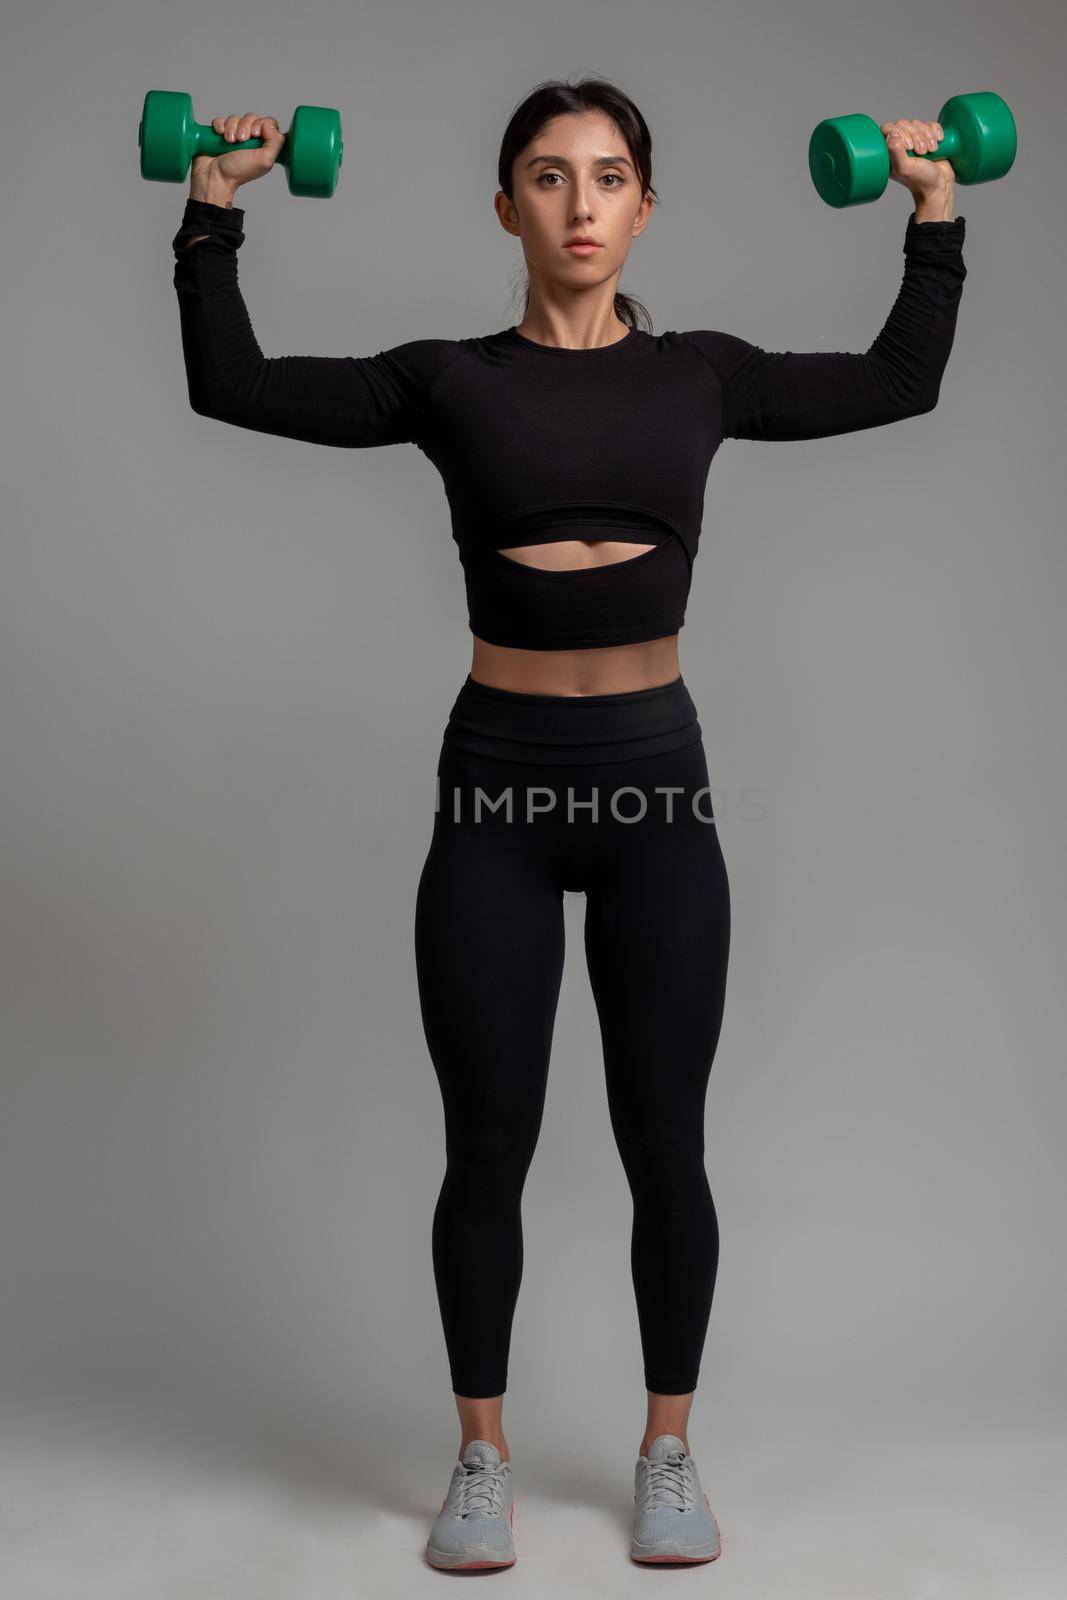 Focused fit brunette in black sportswear performing upper body workout in studio on grey background, doing dumbbell shoulder press. Fitness and bodybuilding concept